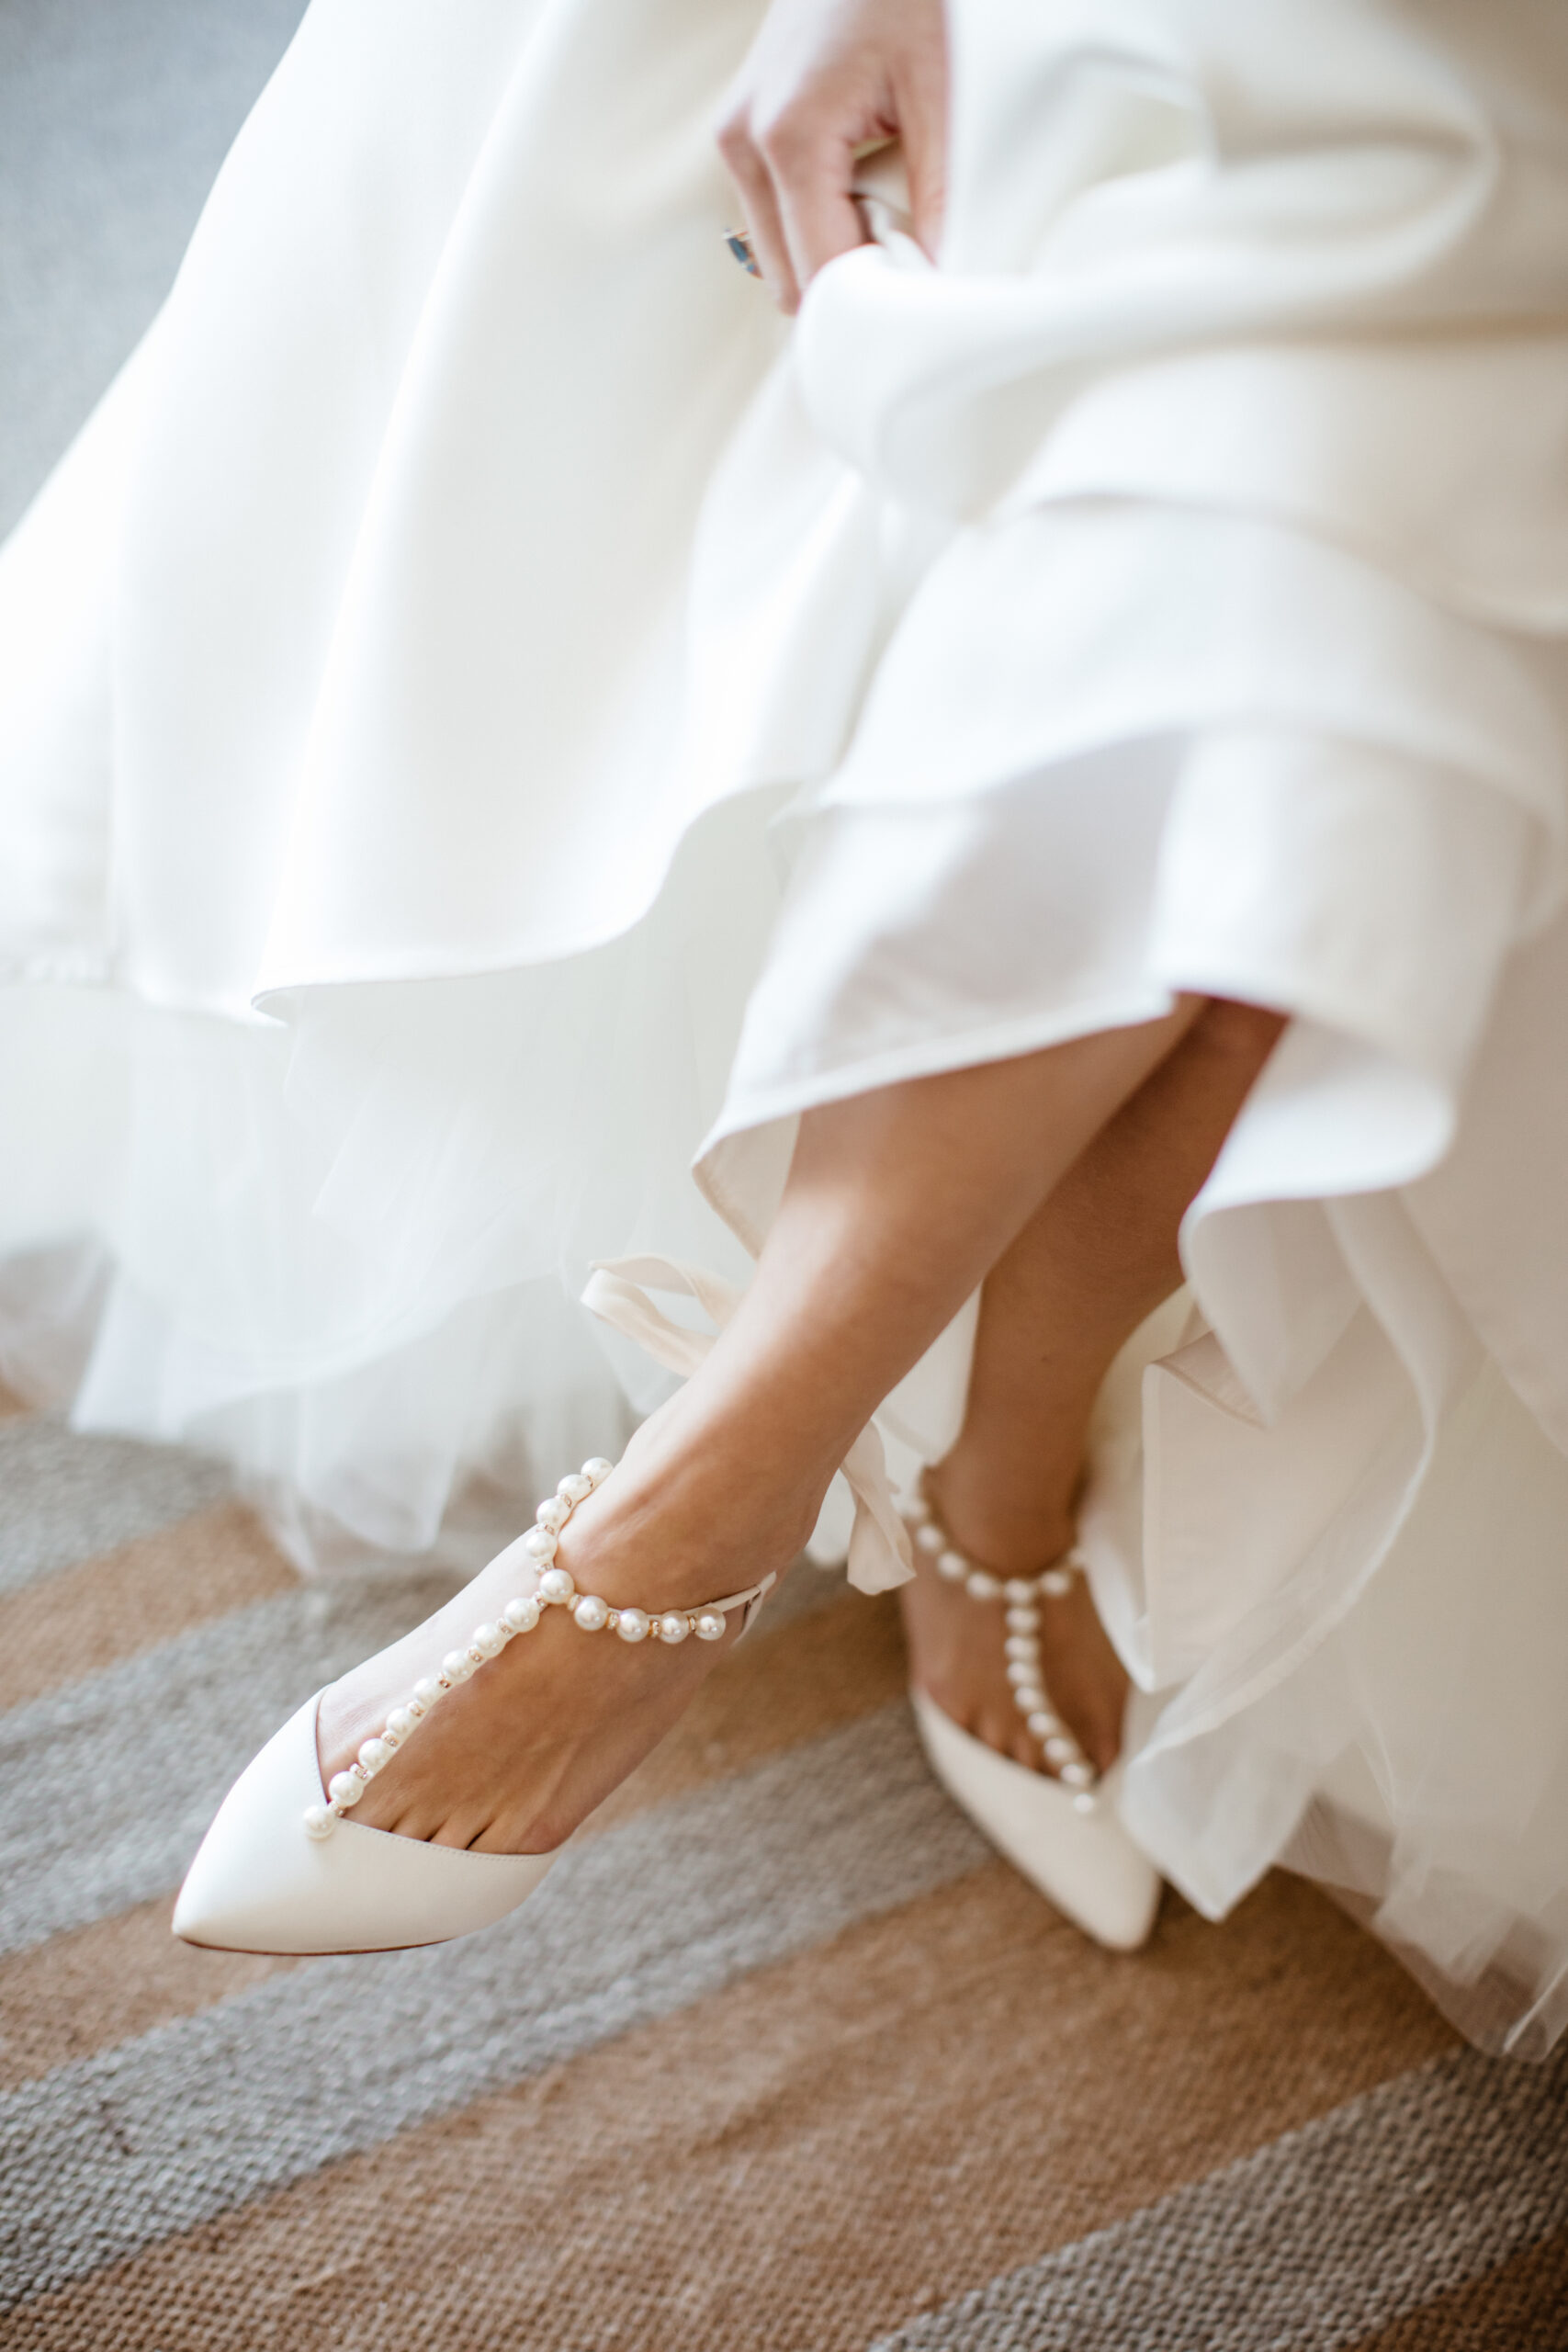 Stunning pearl-studded bridal shoes for a vineyard wedding